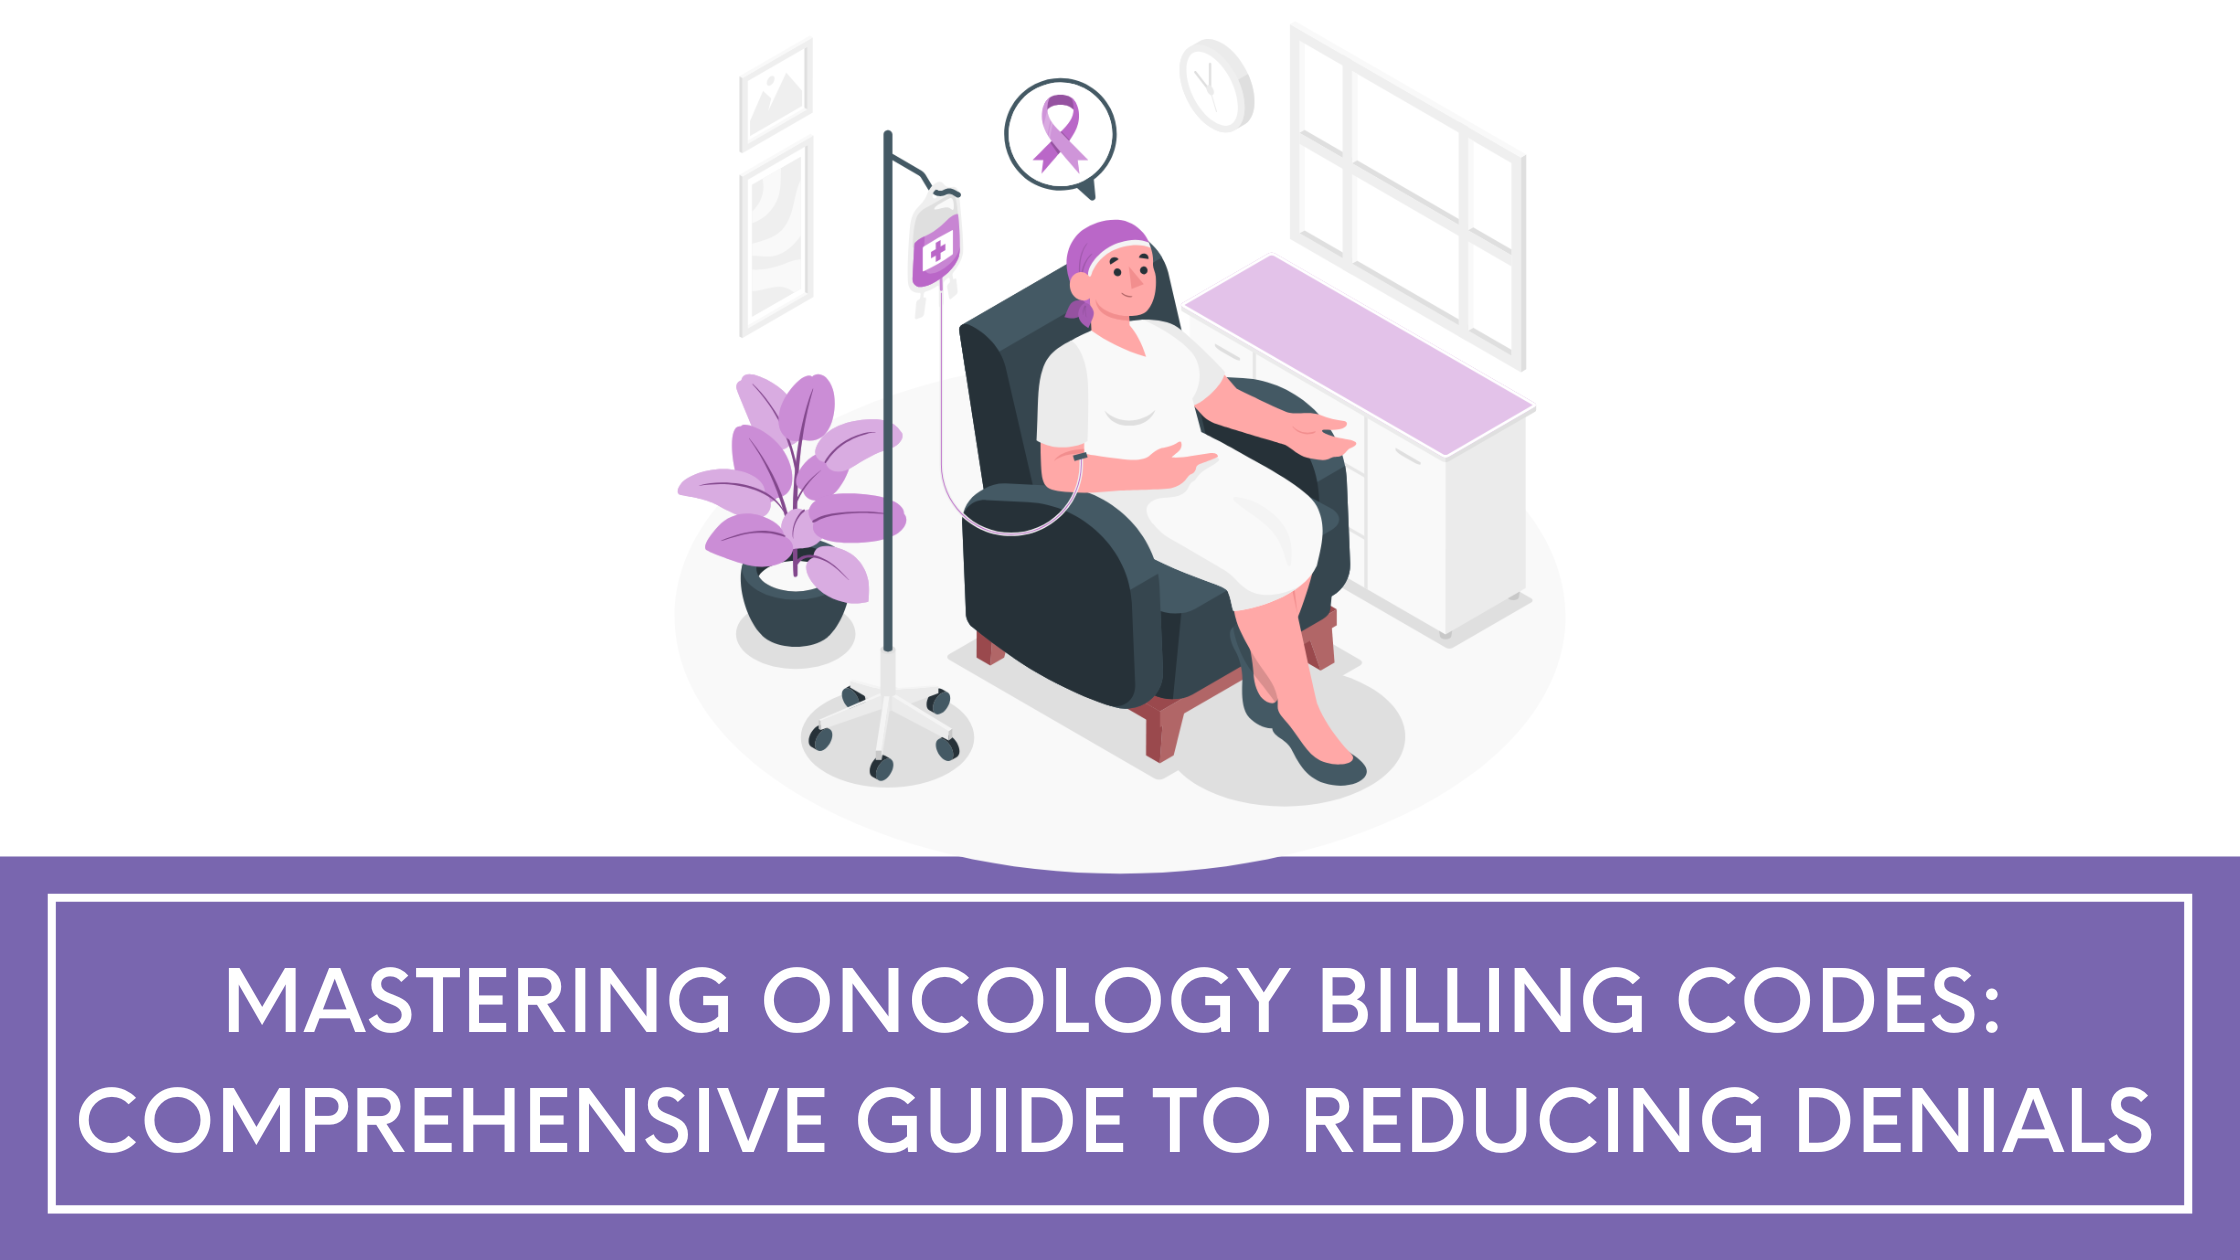 Mastering Oncology Billing Codes: Comprehensive Guide to Reducing Denials